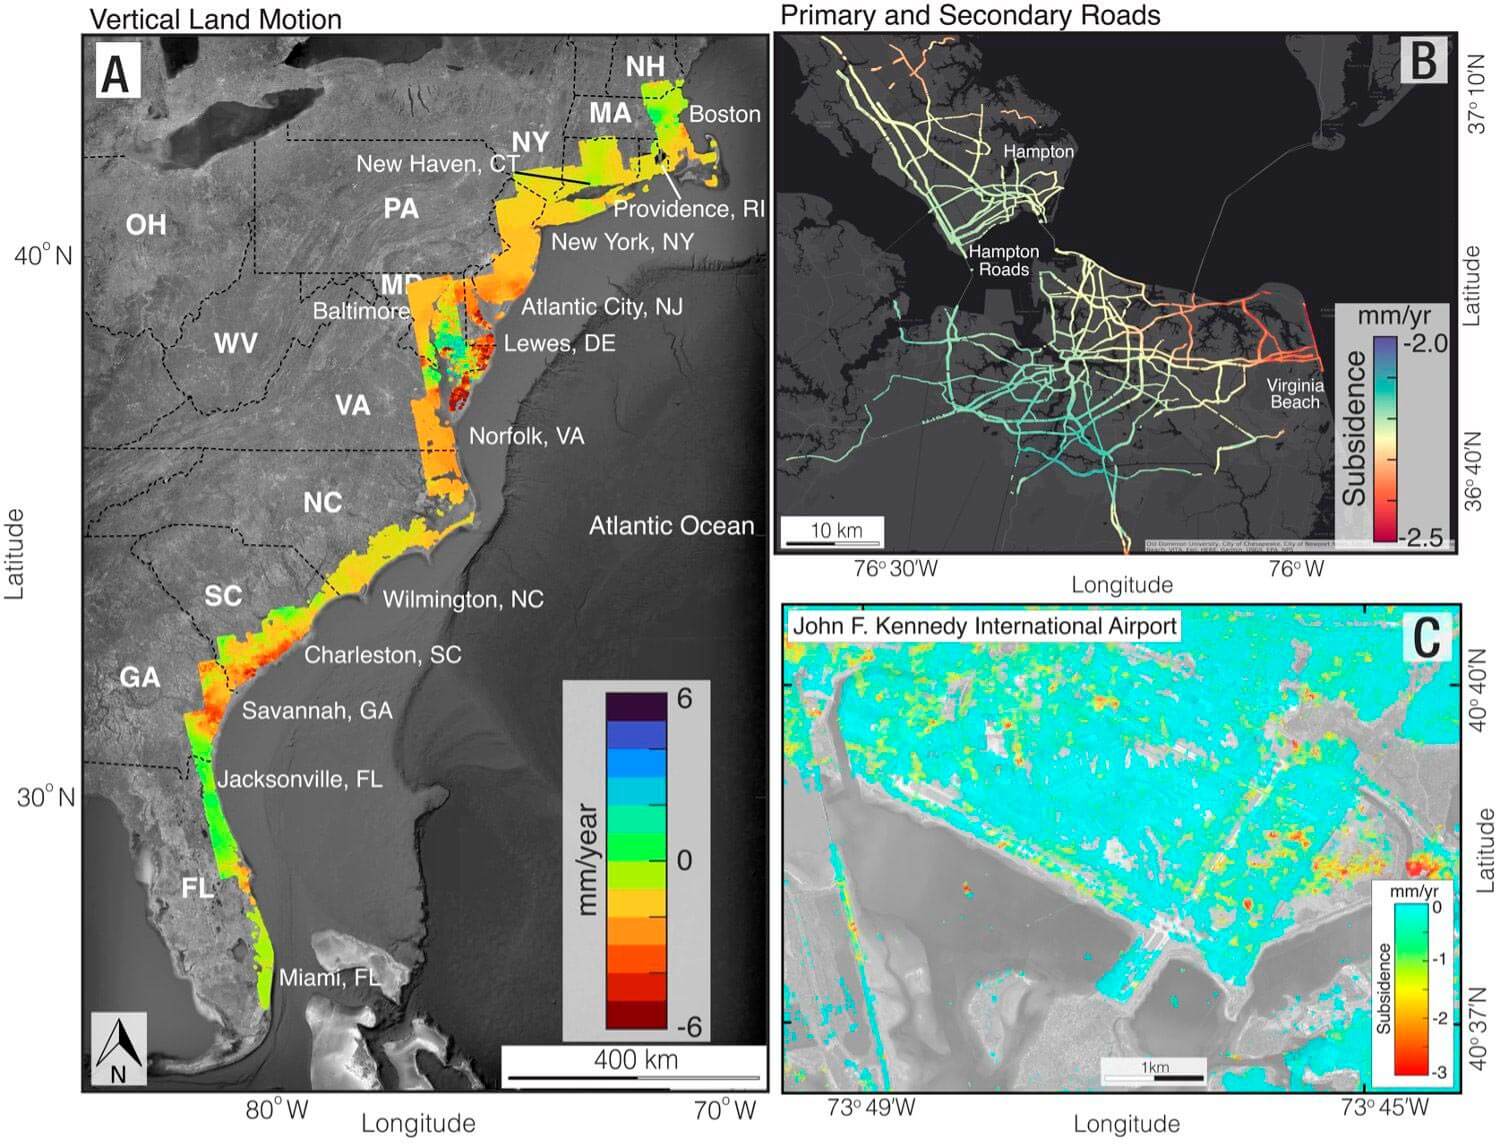 The graphic above contains: a photograph from space of vertical ground motion on the East Coast (left panel); Major, secondary, and interstate highways in the Gulf Coast, Norfolk, and Virginia Beach areas of Virginia (upper right panel); and John F. International Airport. Kennedy in New York (bottom right panel). The yellow, orange and red areas on these maps indicate areas of land subsidence. Credit: Leonard Ohanahan.